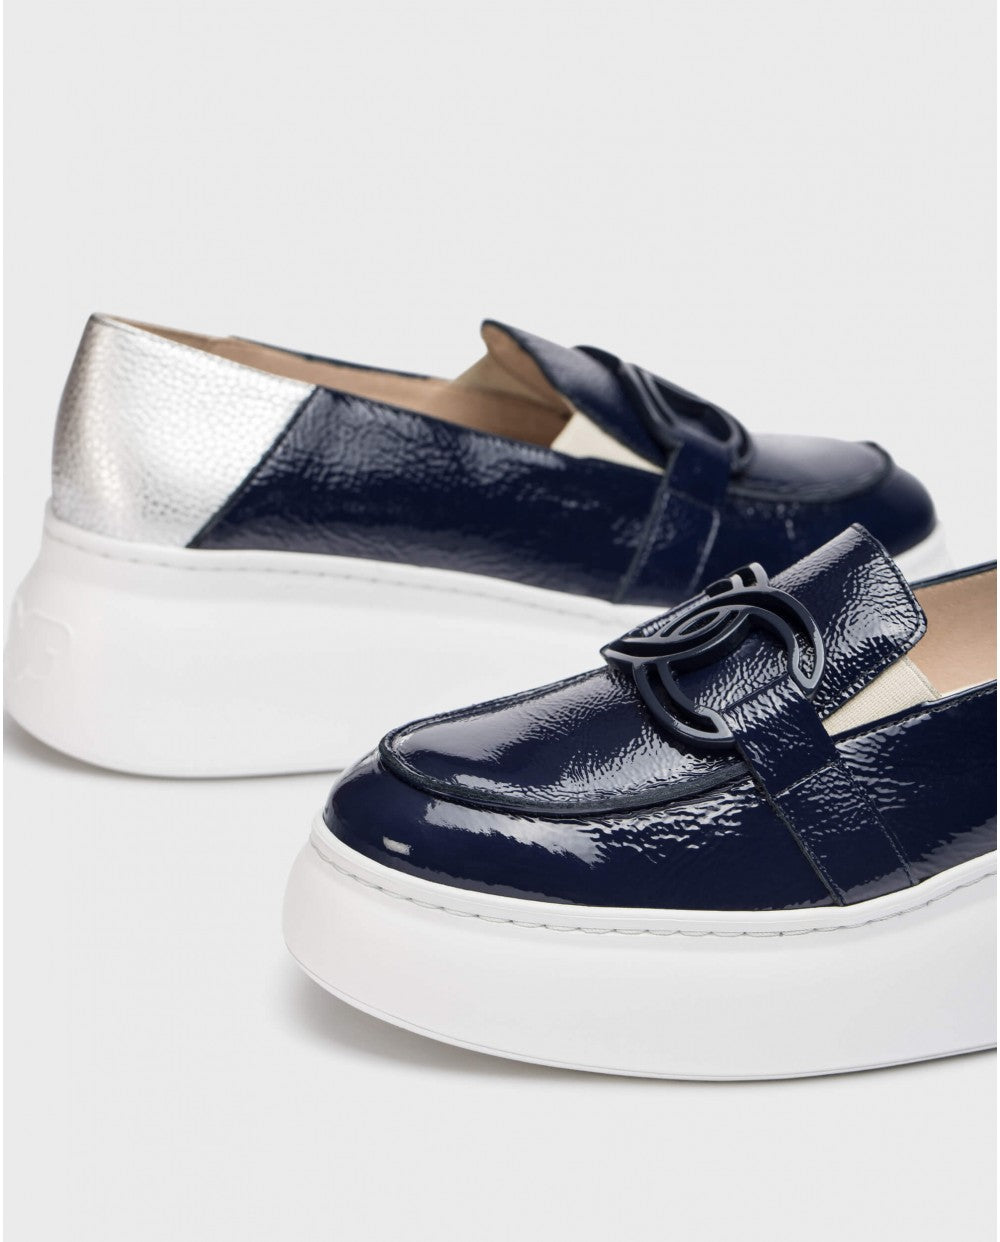 Wonders - A-2652 Navy Patent Wedge Loafer